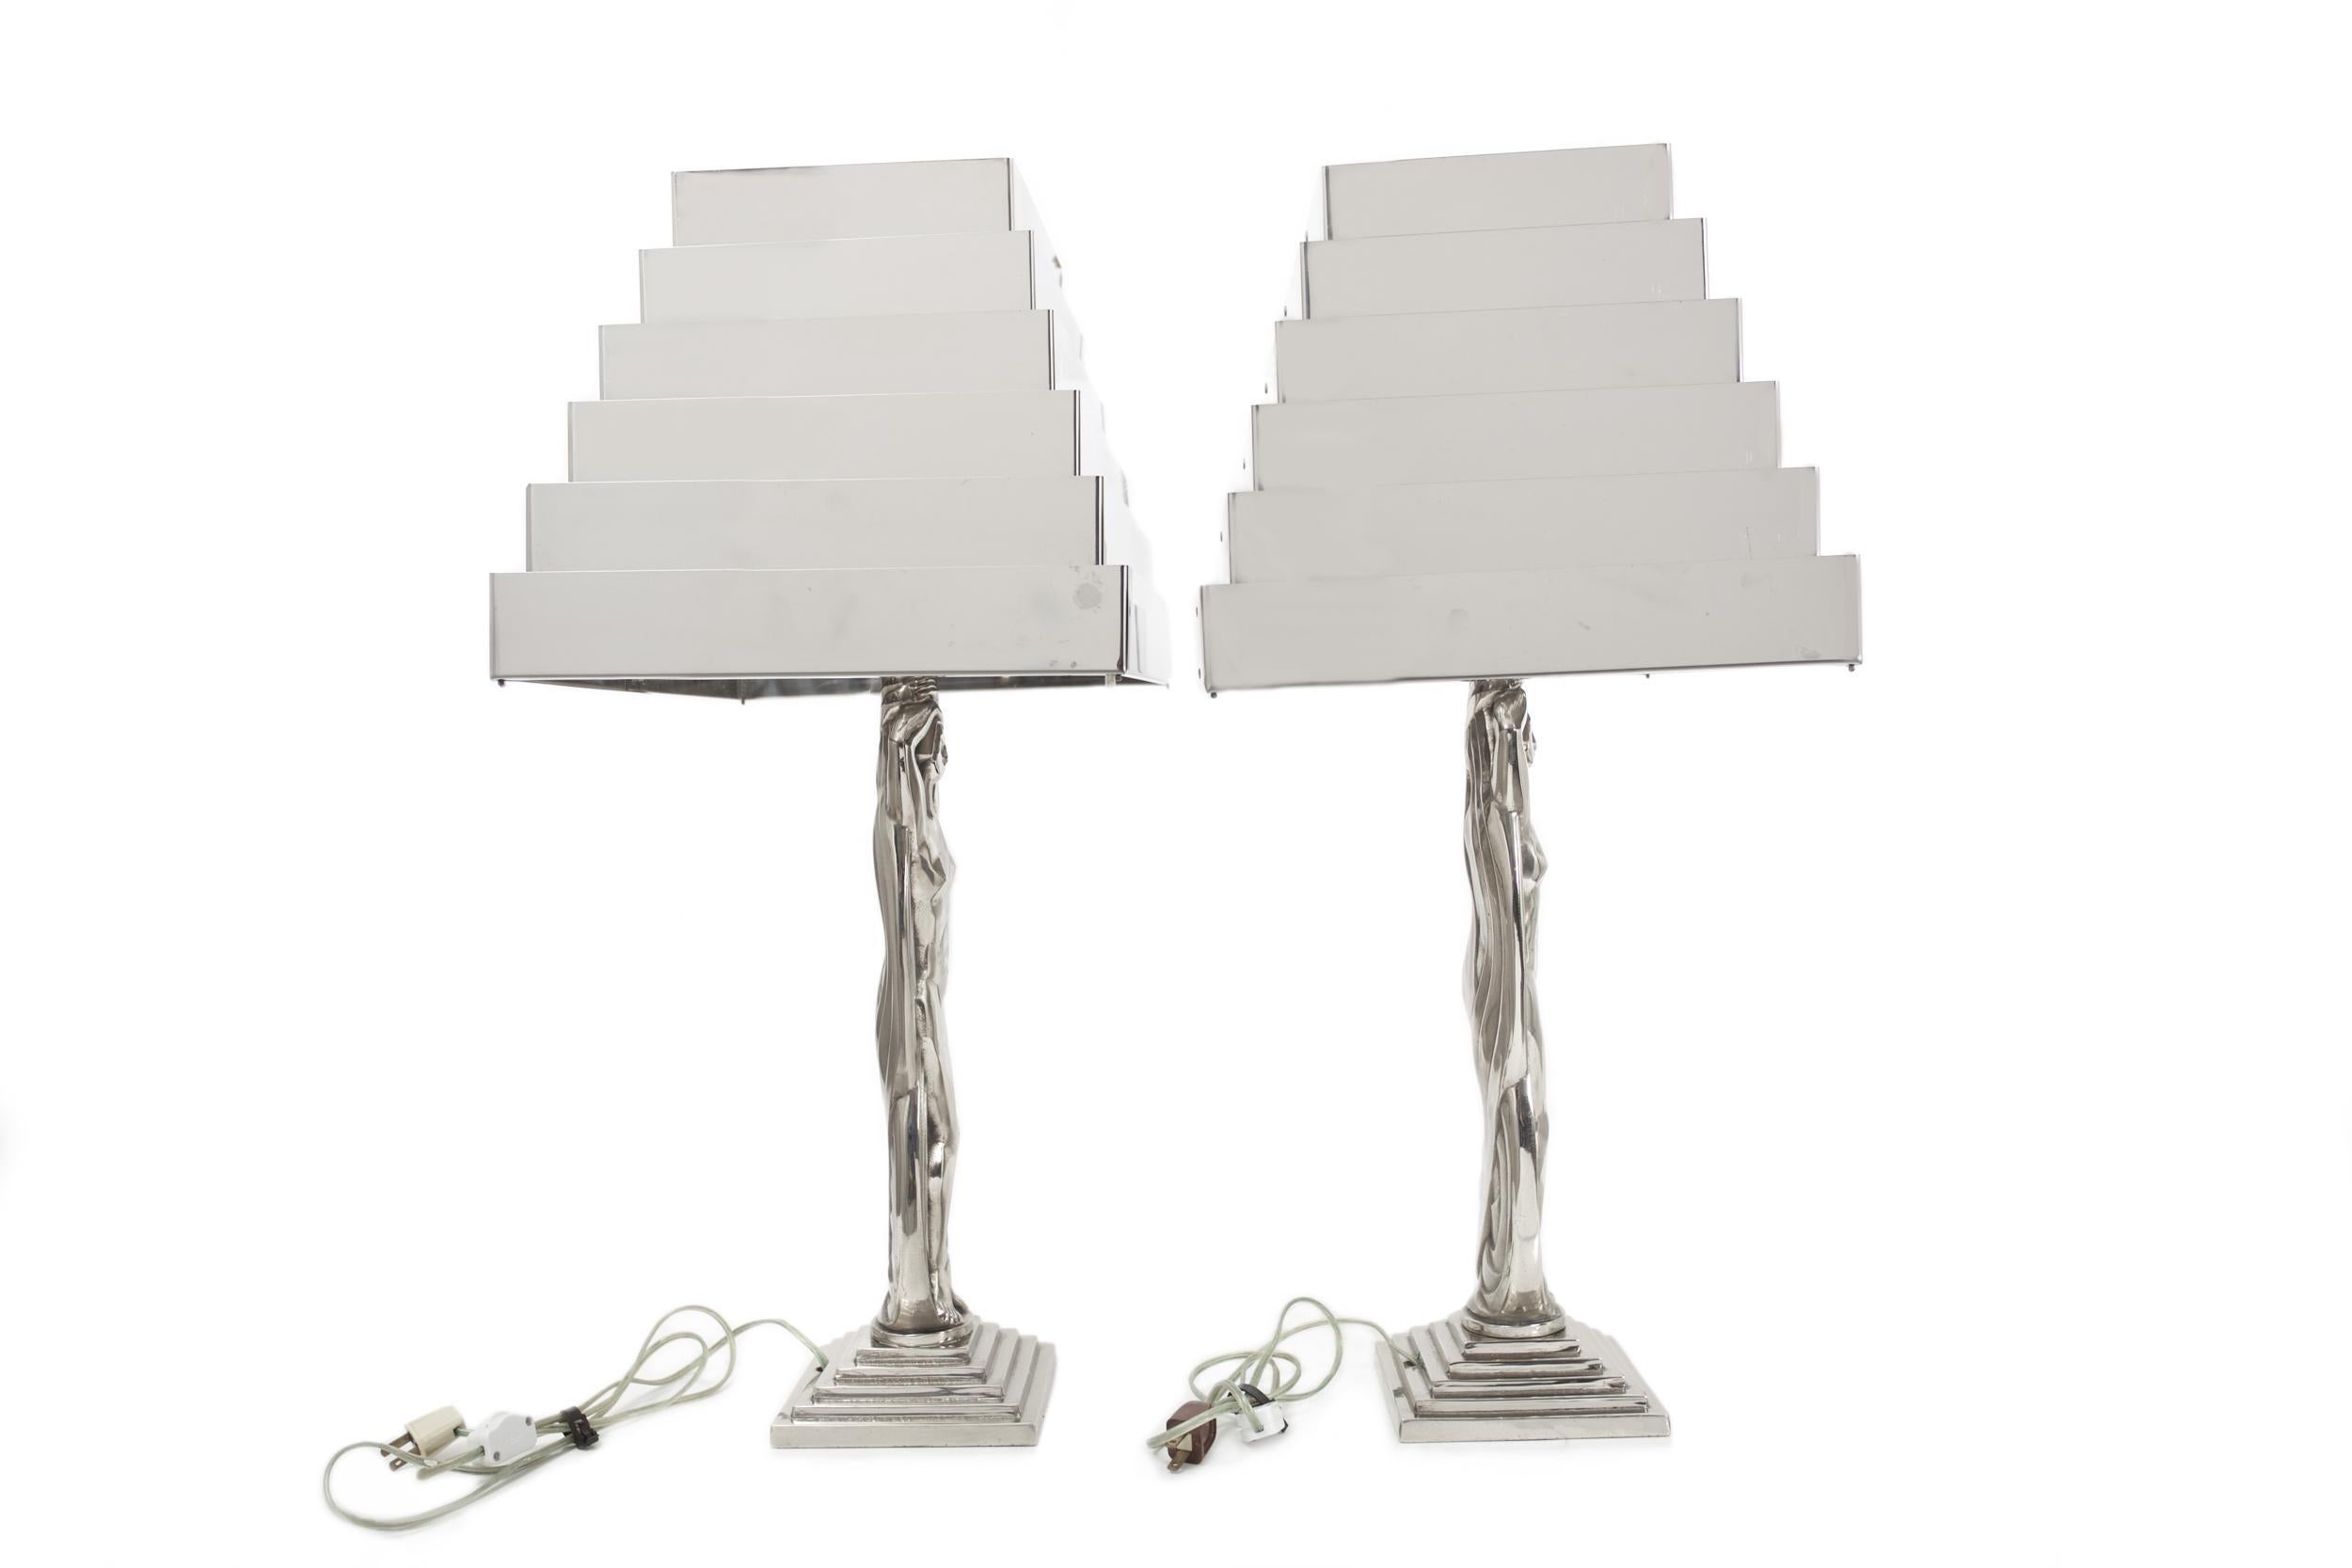 French Rare Pair of Art Deco Stylized Figural Nickel Table Lamps, M. Bouraine, C 1930s